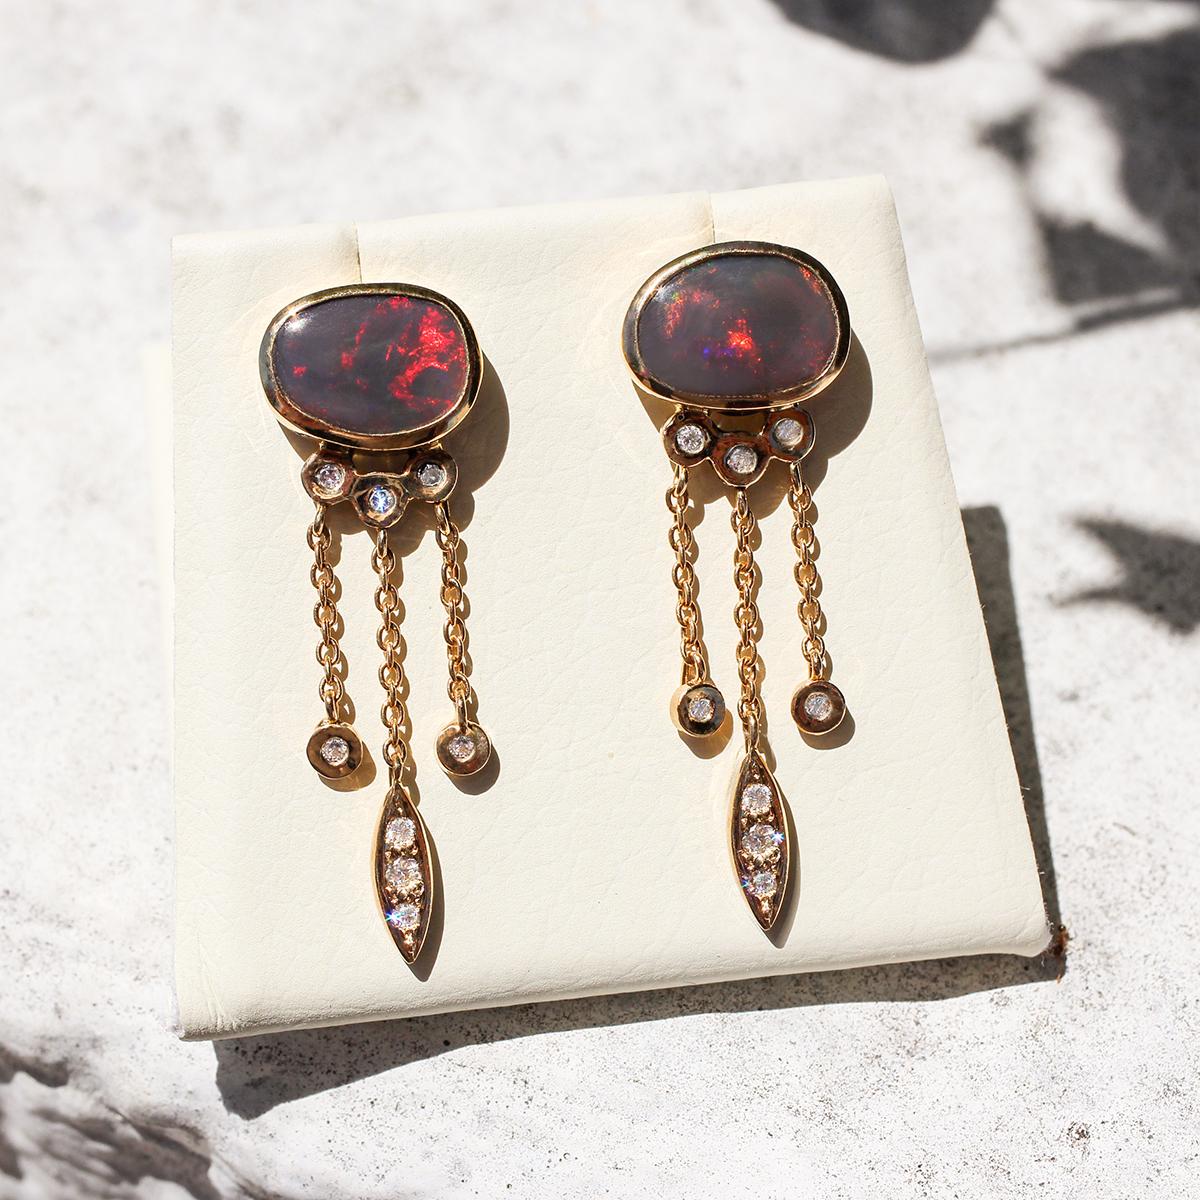 Rare it is to find two black opals that match. These beautiful stones have been cut from the same large opal, giving a matching pair of deep red flashes. Black opal with red is the rarest of all opal, add this to the very cute setting in solid 18K